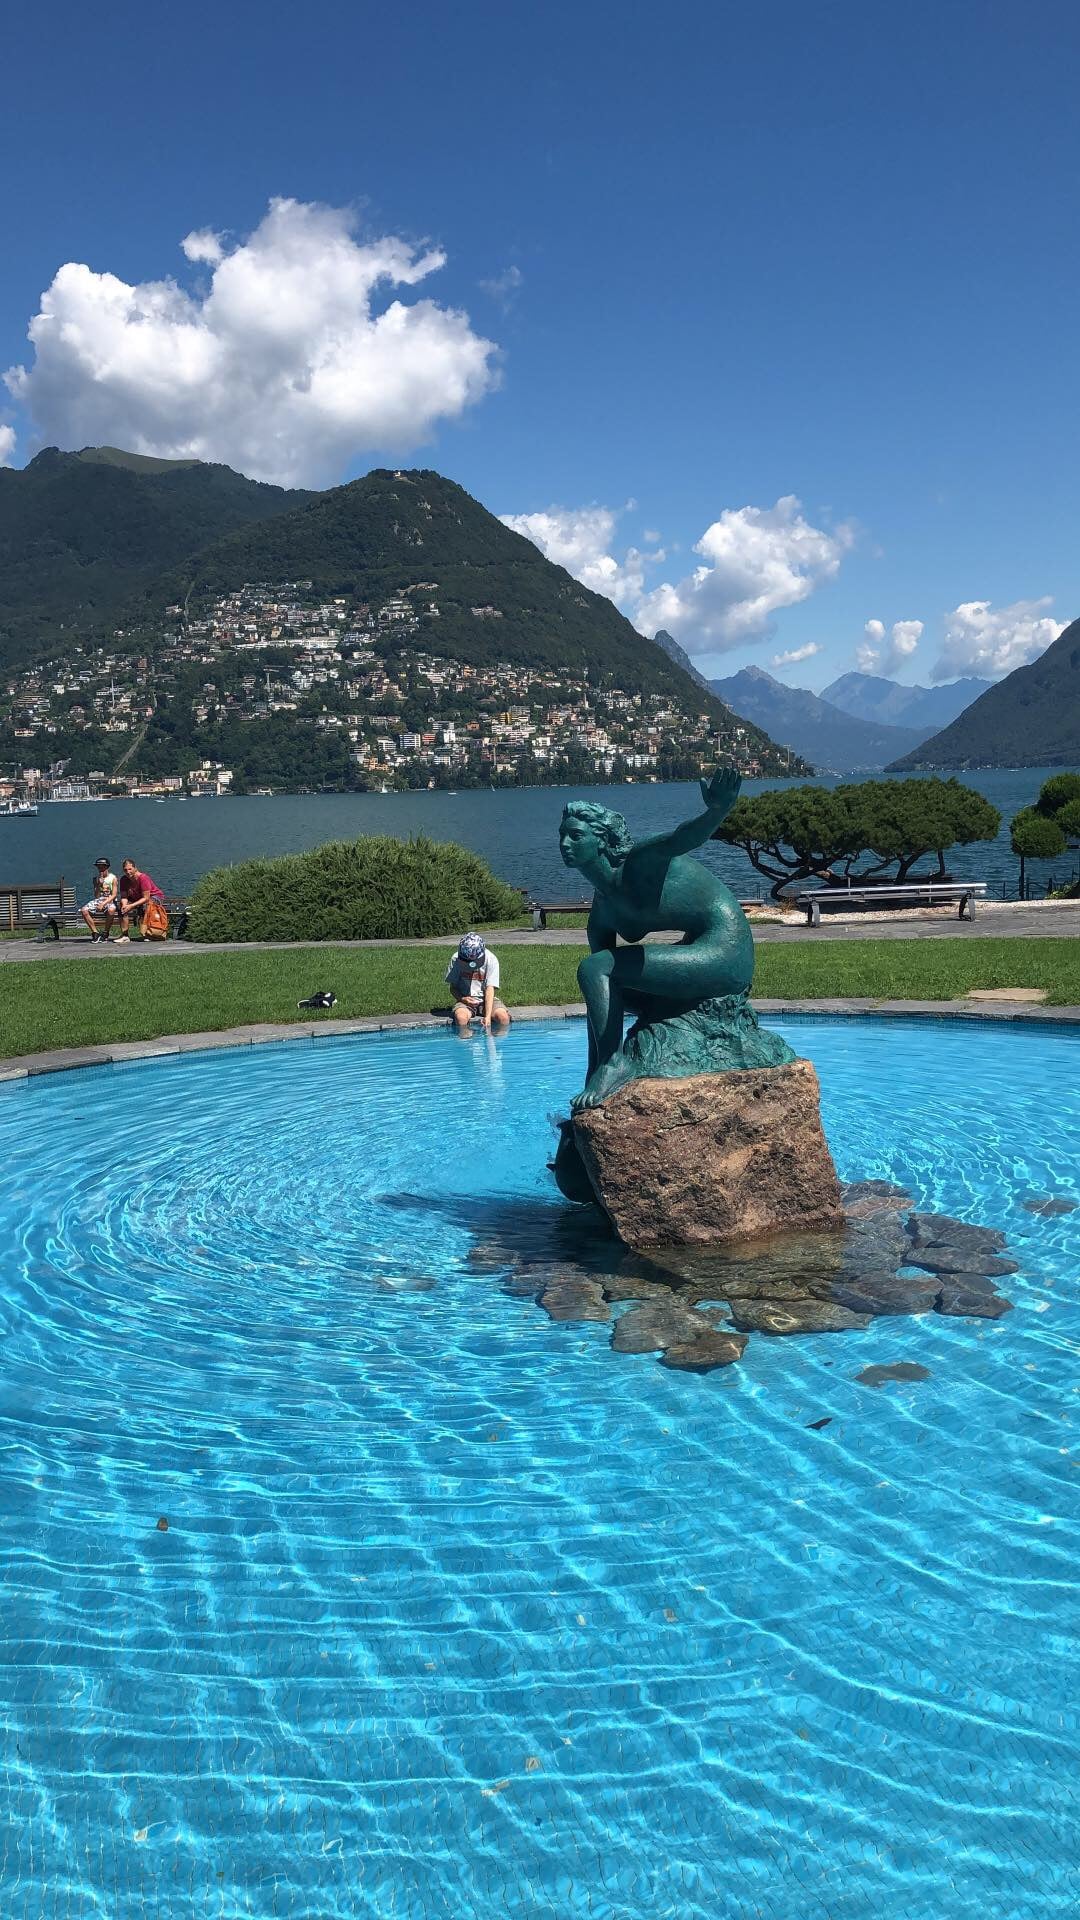 One day in Lugano